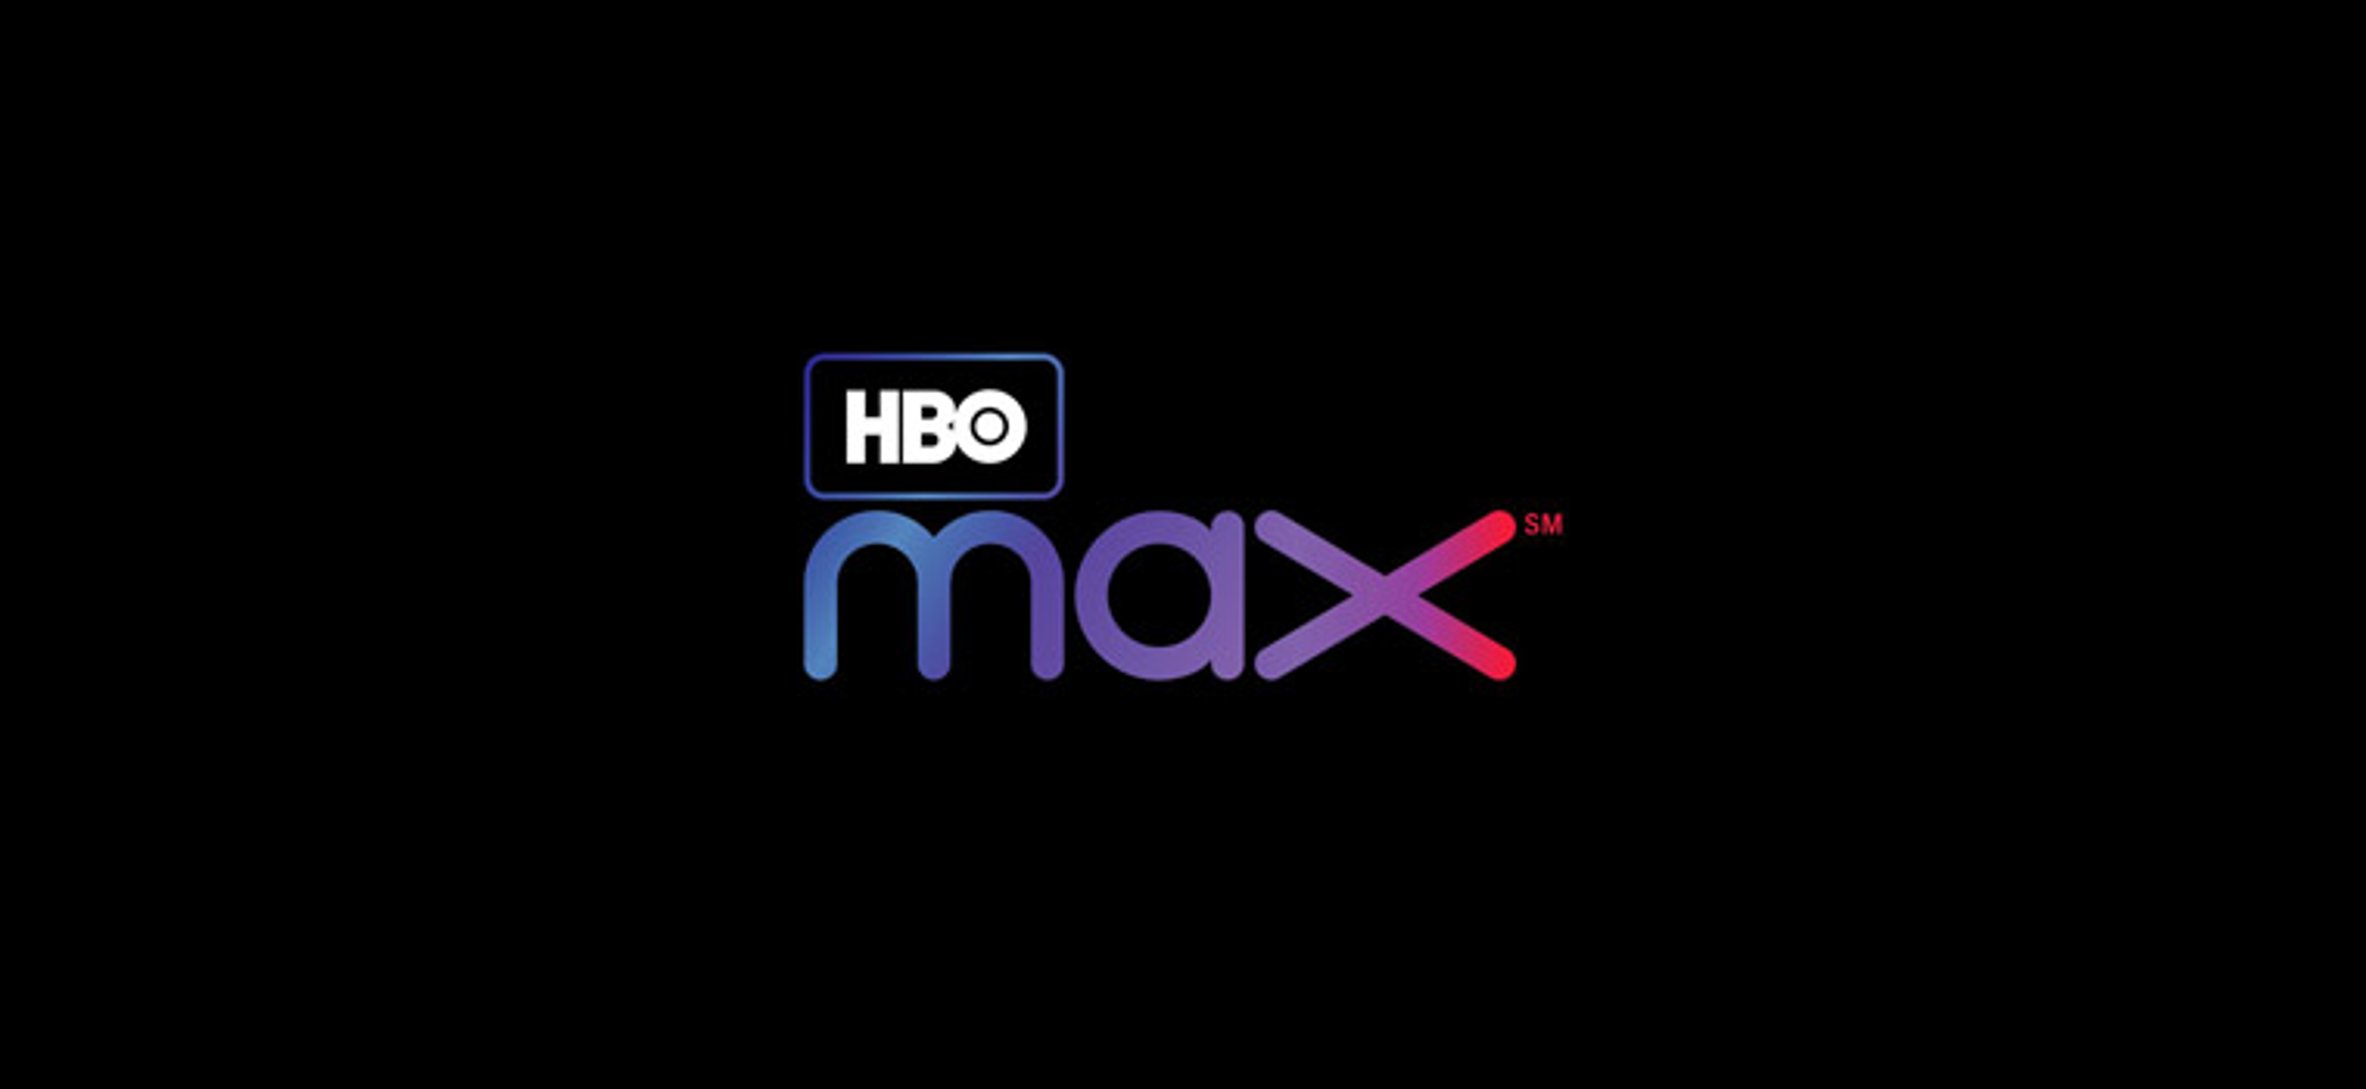 HBO Max Limited Series Staircase as a recurring background actors